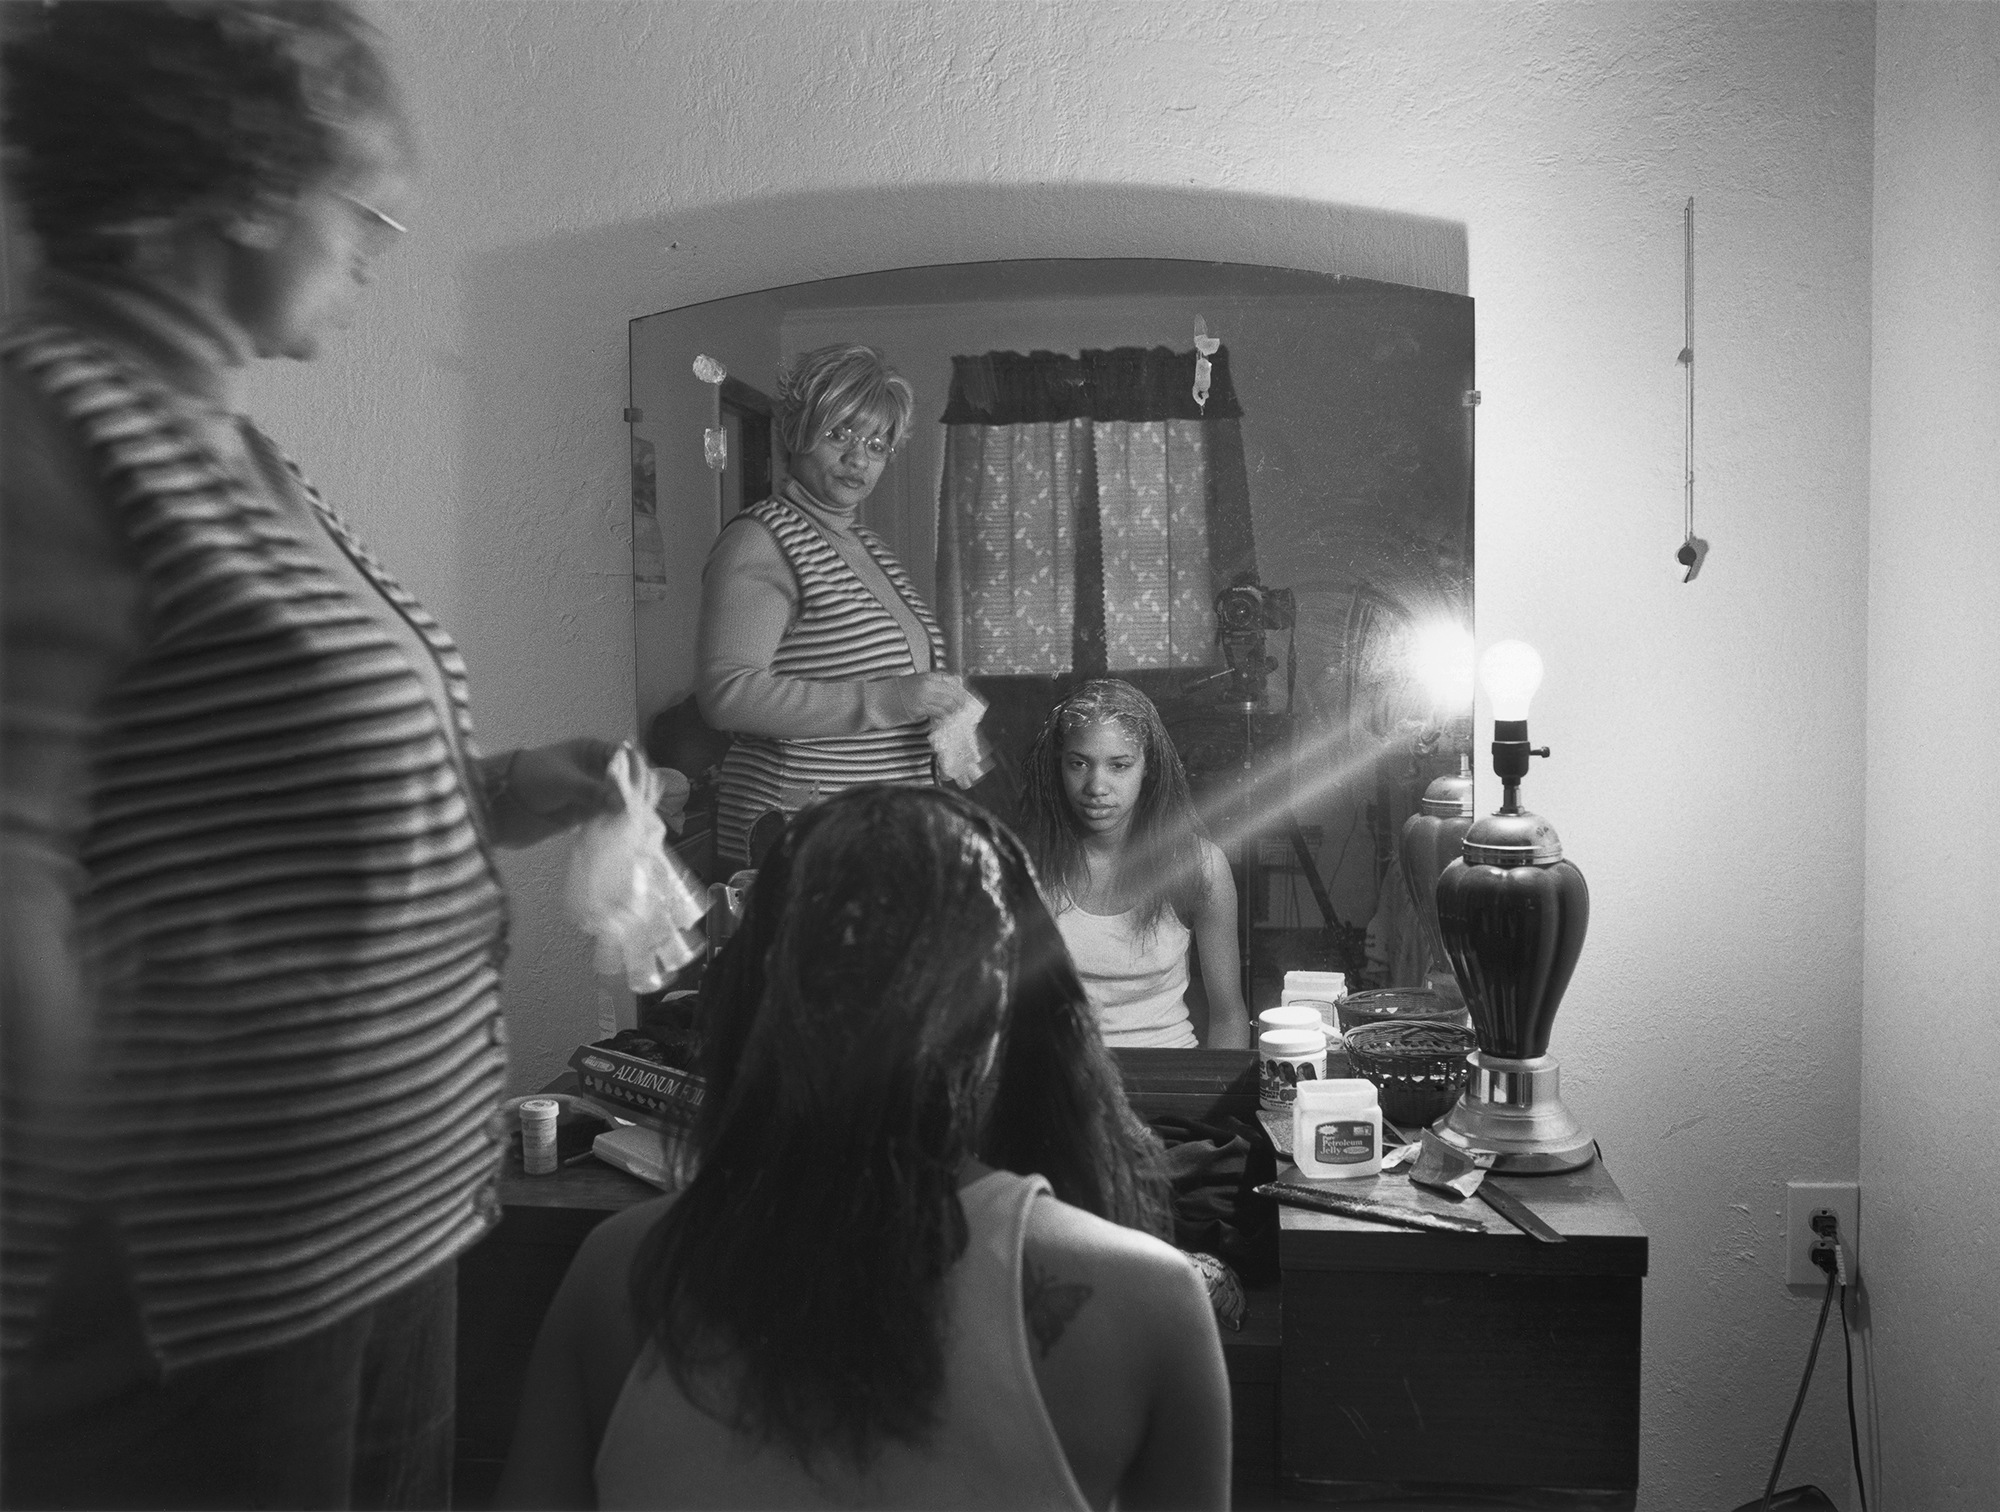 “For the past 12 years, my mother and I have made collaborative portraits together, disrupting the idea that the privileged photographer comes from the outside.” Mom Relaxing My Hair 2005, from "The Notion of Family" (Aperture 2014).